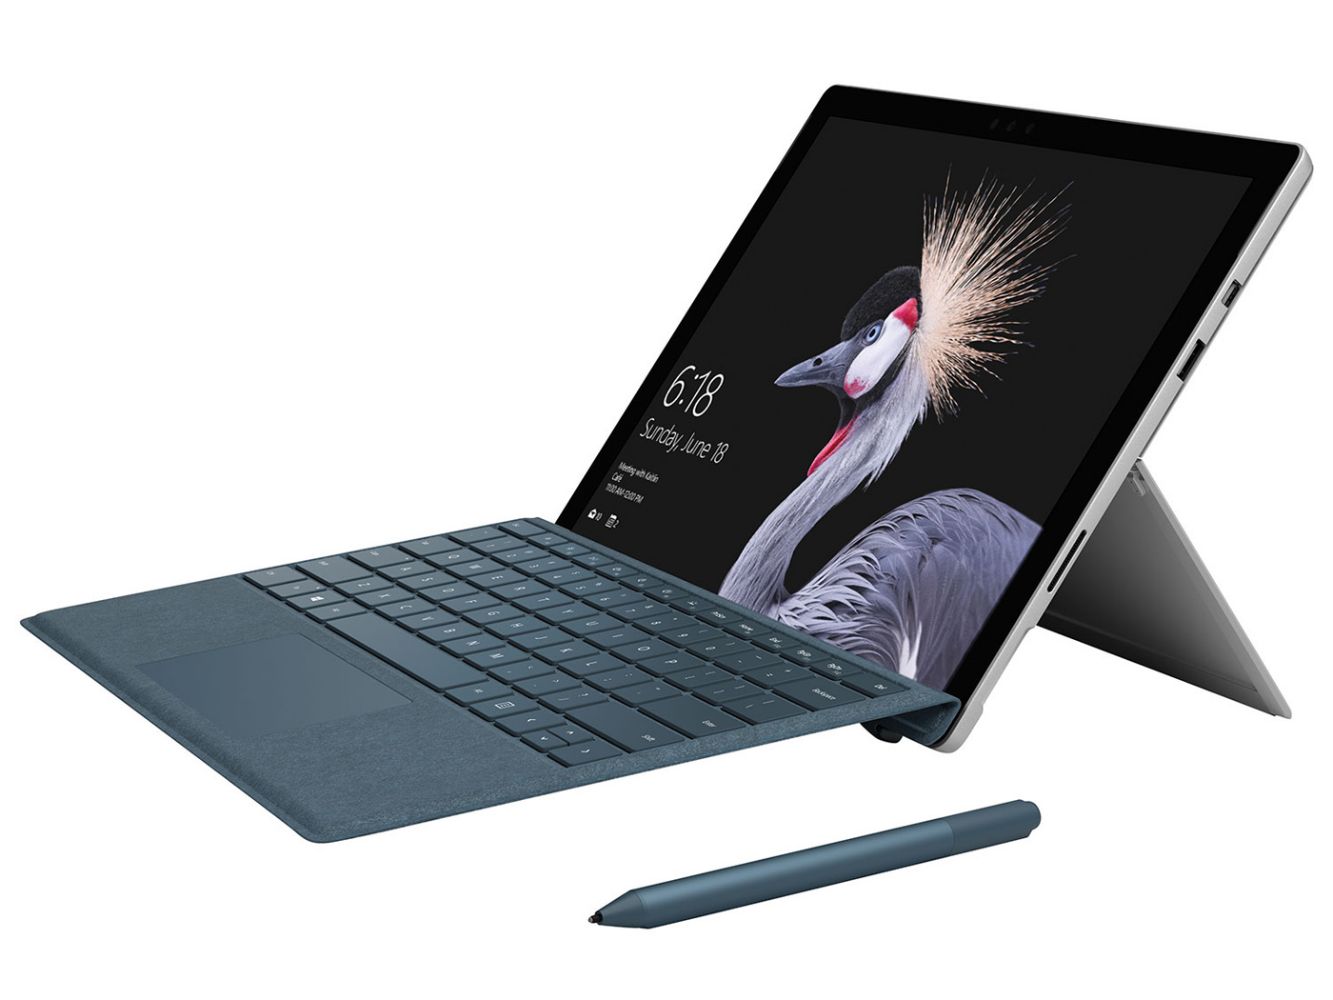 Microsoft Surface Pro 4,5,6, TFT Displays & Much More!